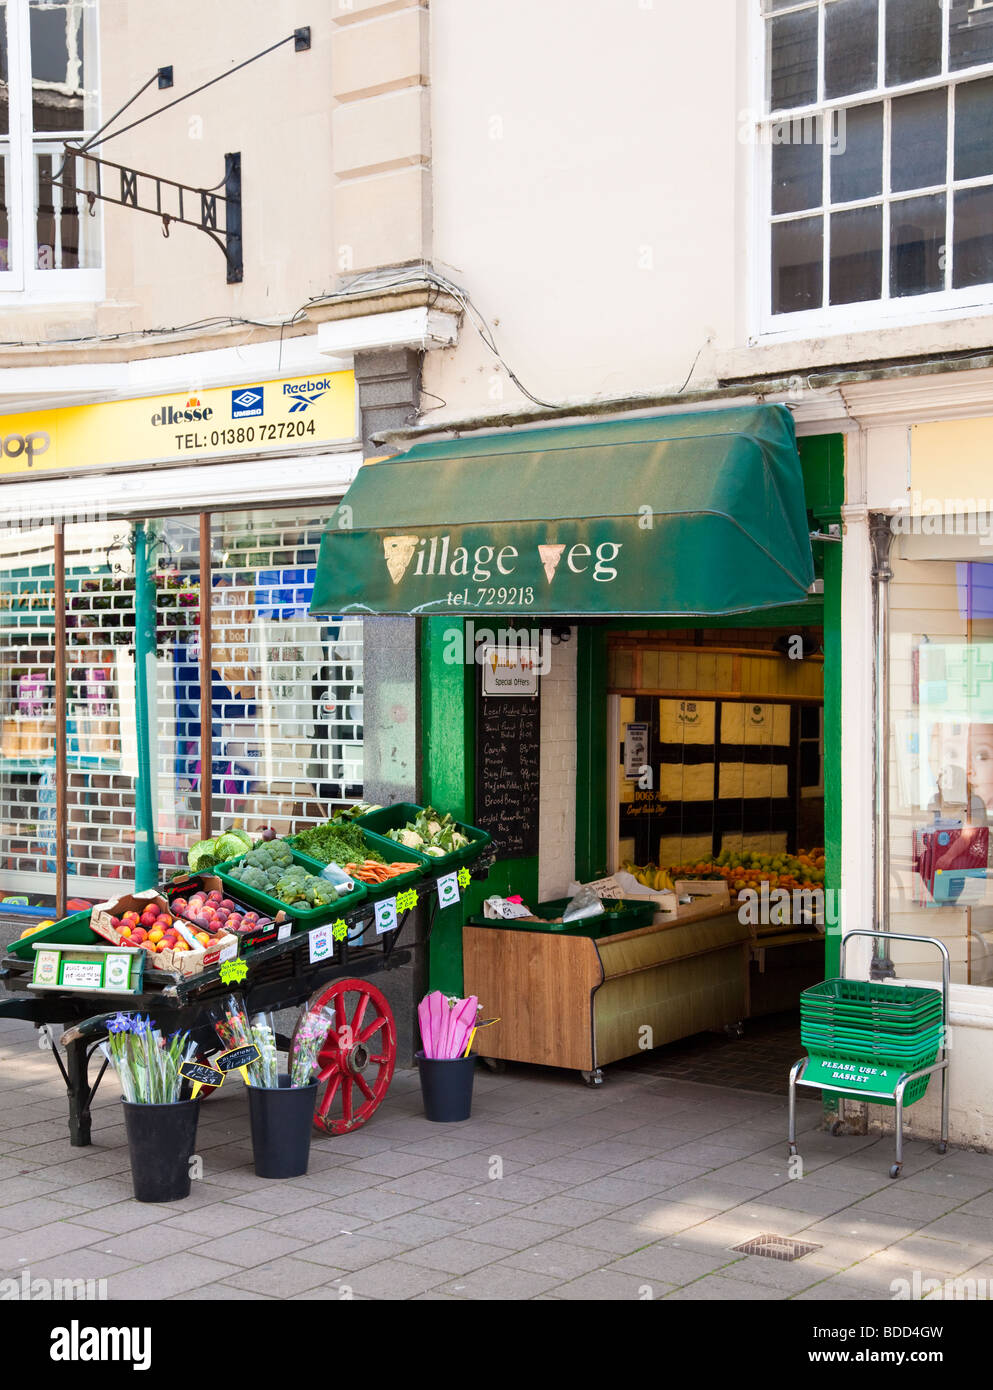 Small Greengrocery in Devizes, Wiltshire, England, UK Stock Photo